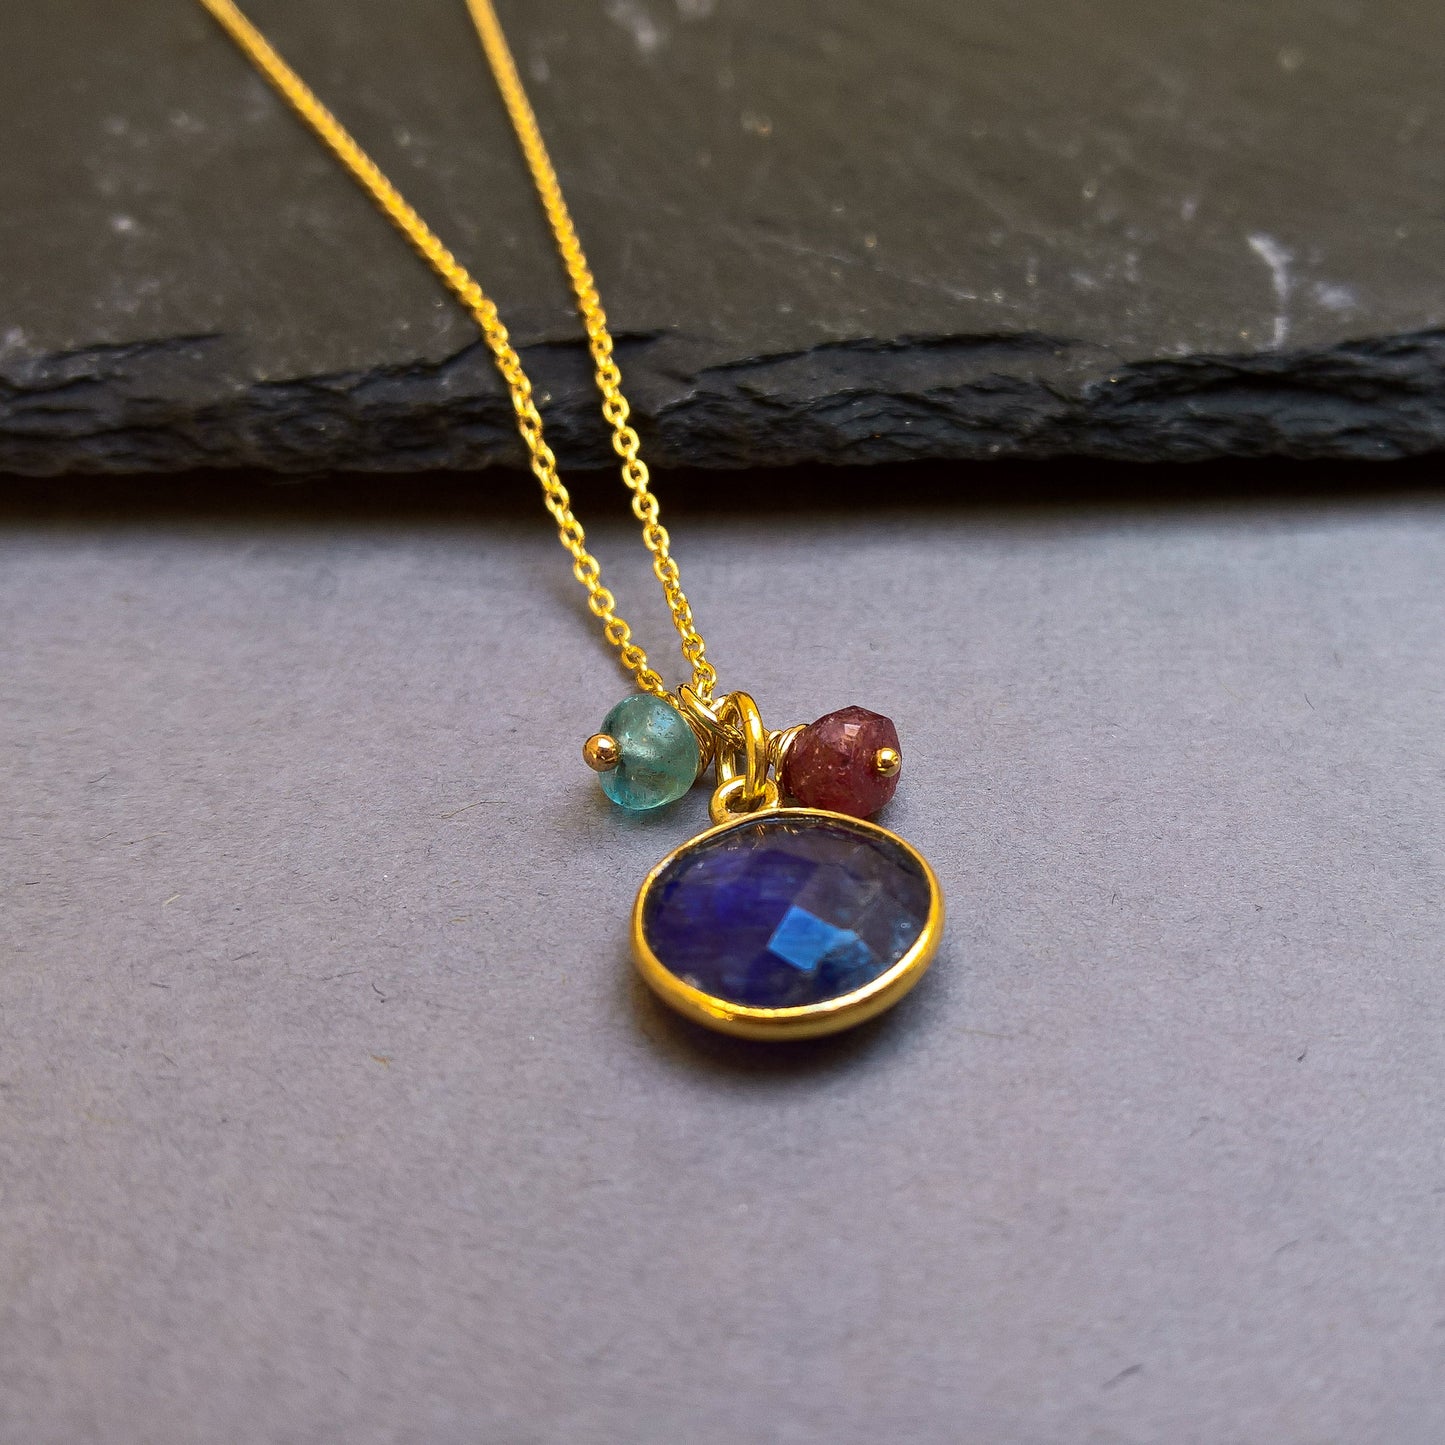 Blue sapphire circle pendant necklace in gold vermeil silver